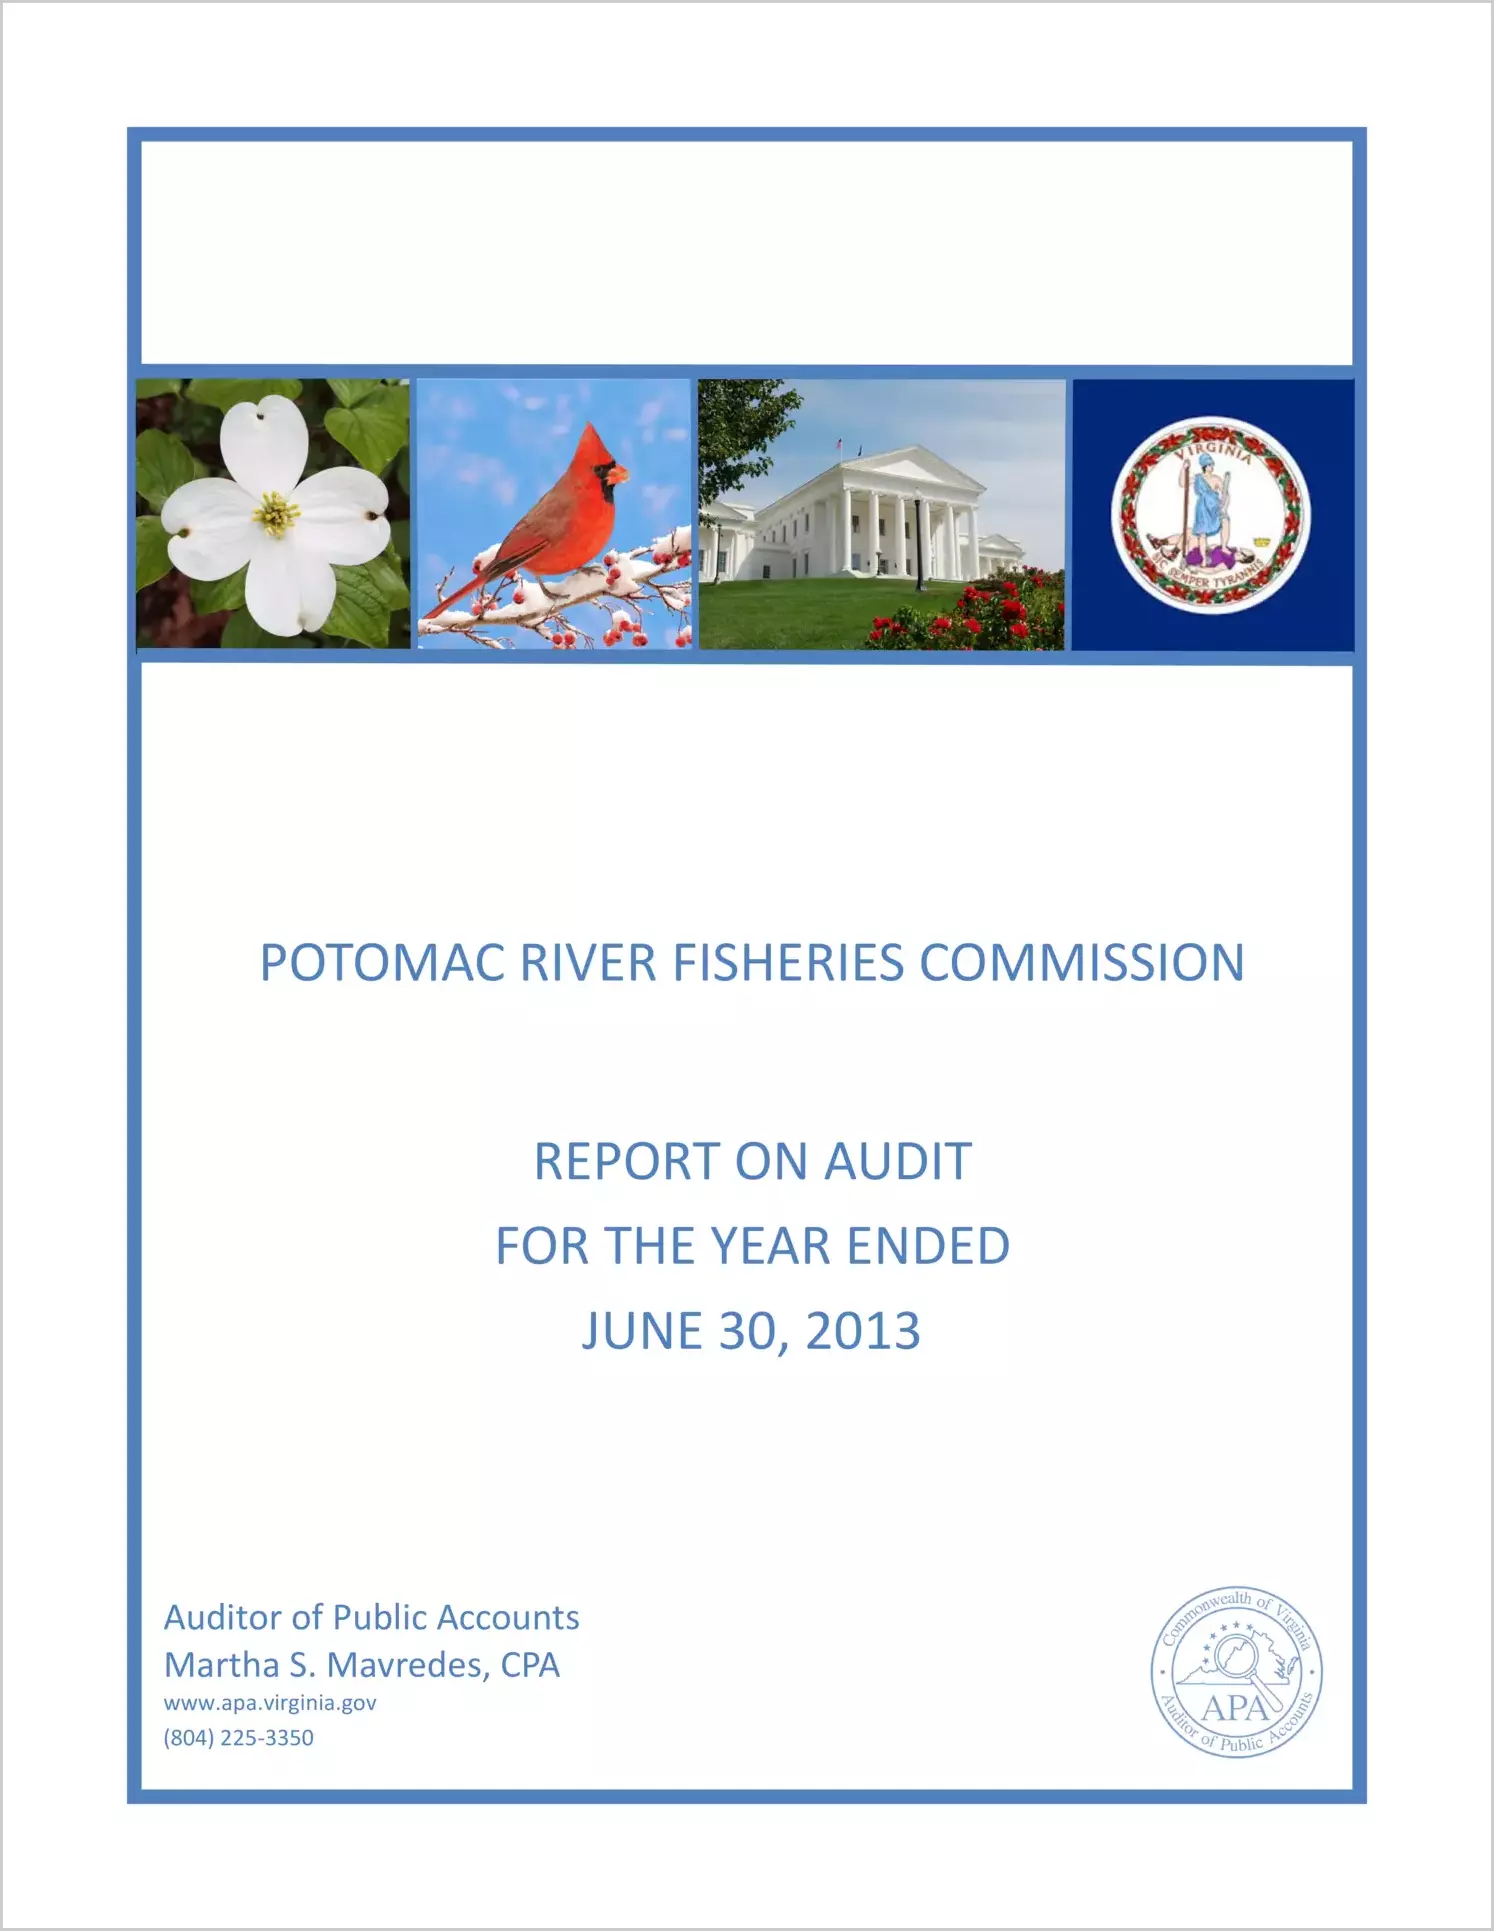 Potomac River Fisheries Commission report on audit for the year ended June 30, 2013